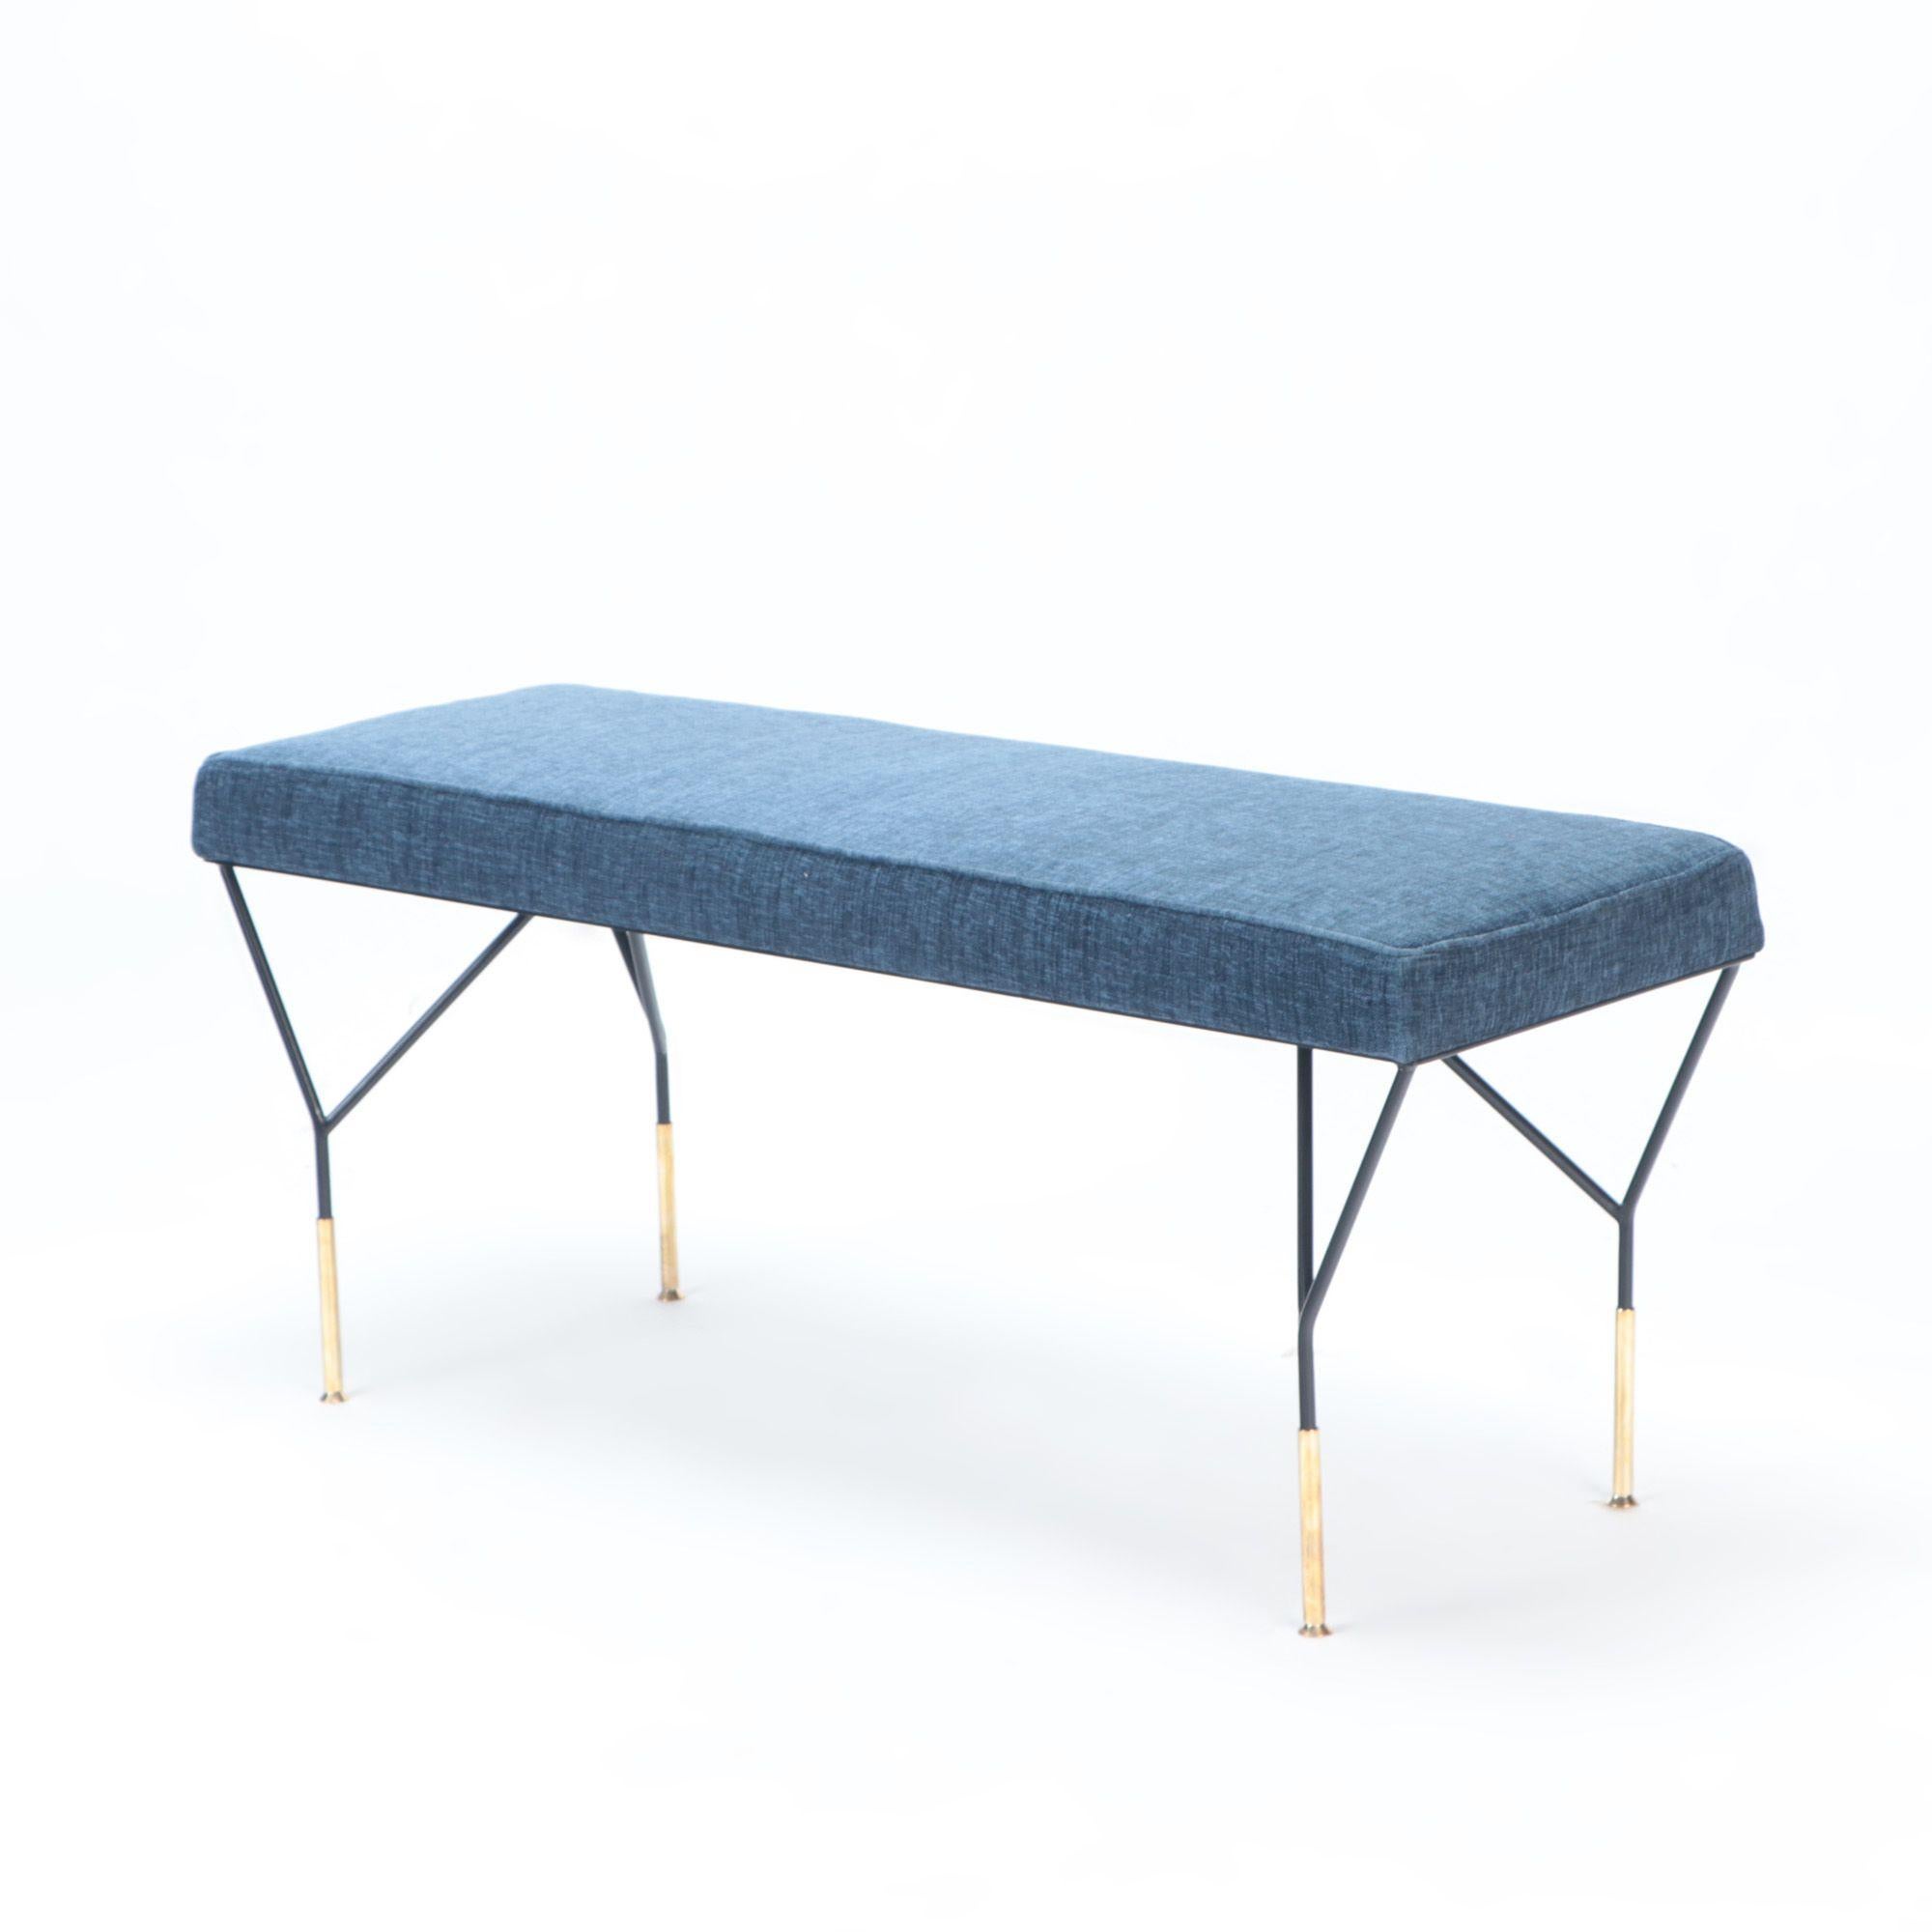 A pair of Italian contemporary brass benches with blue upholstered seats.
Can be sold individually.